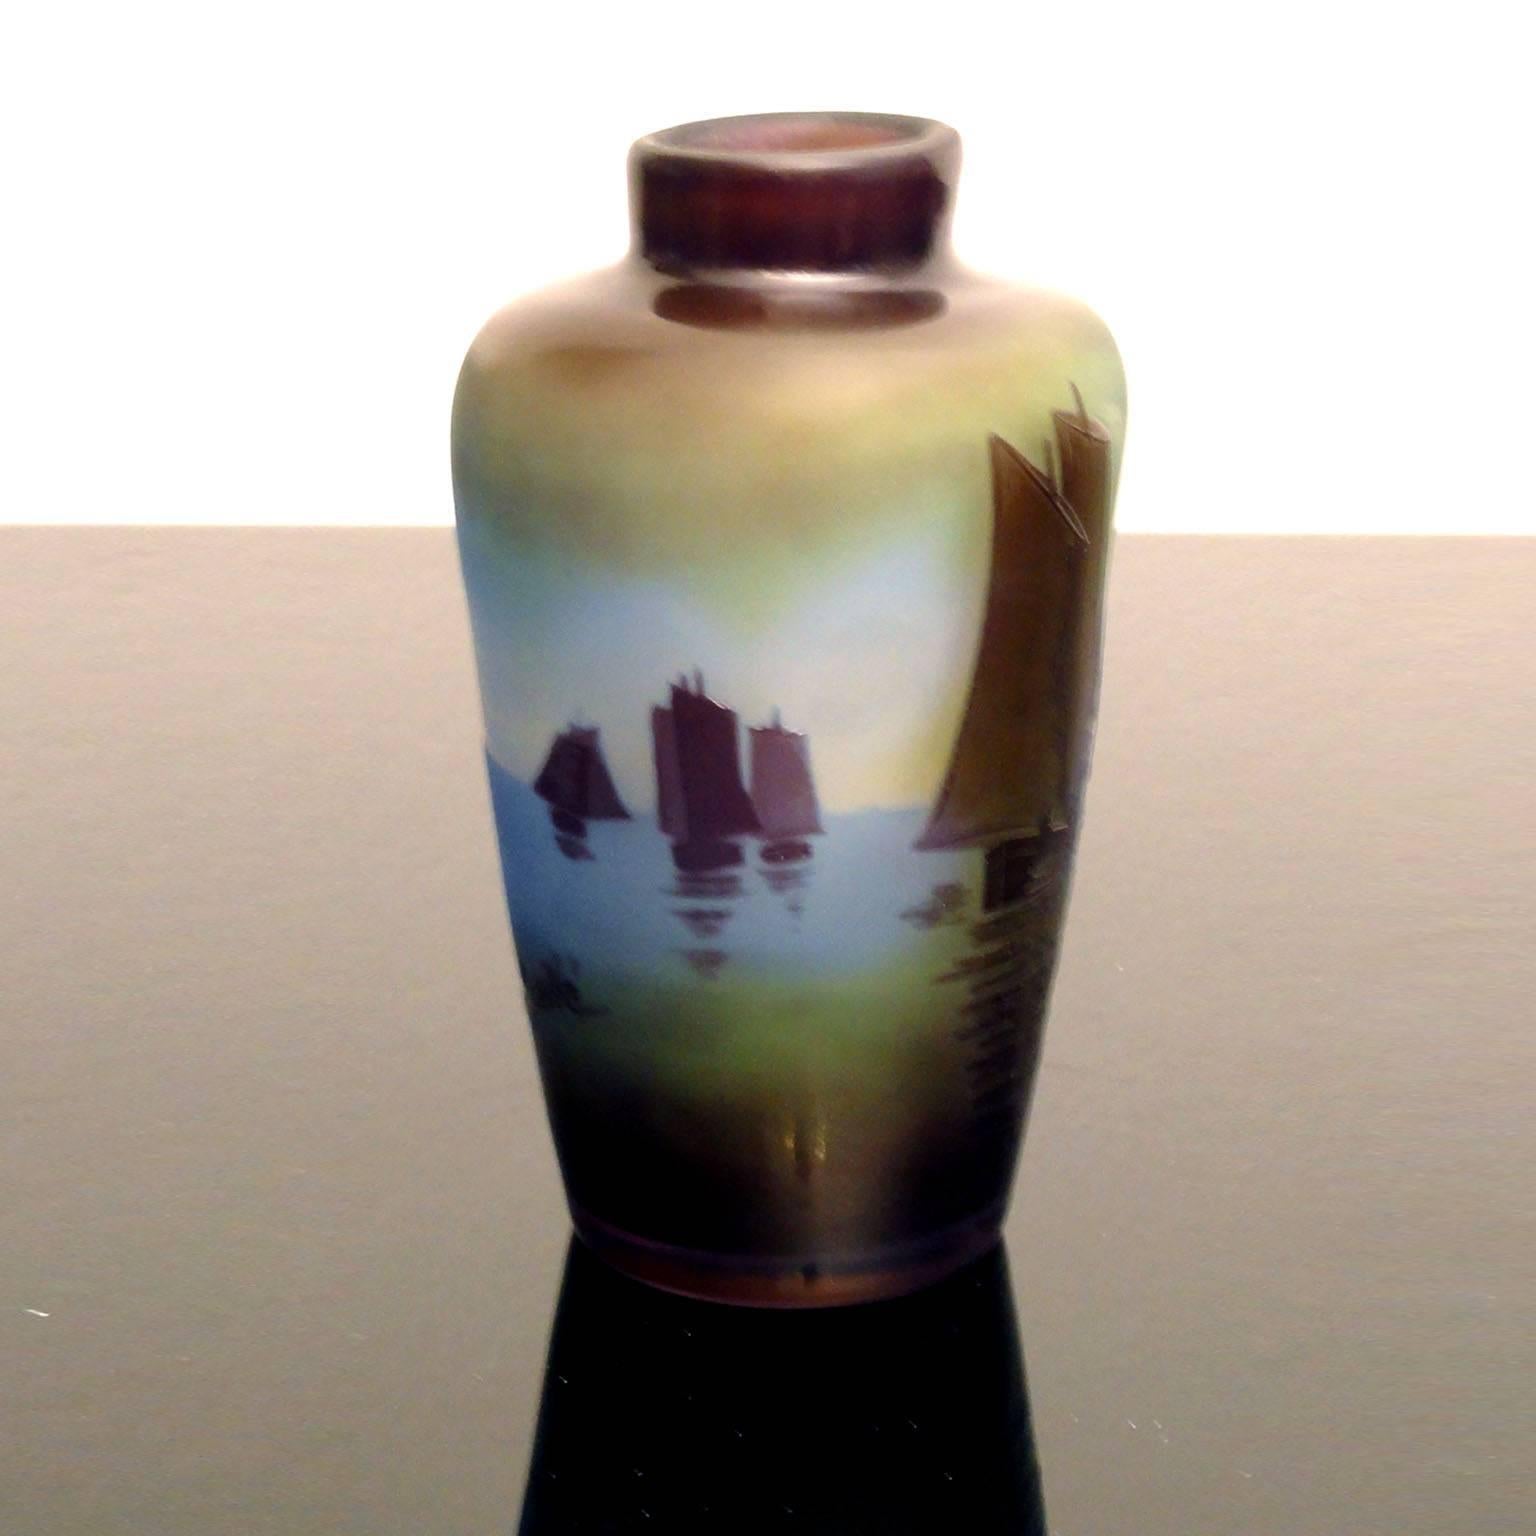 Molded Very Rare Art Nouveau Scenic Vase by Emile Galle